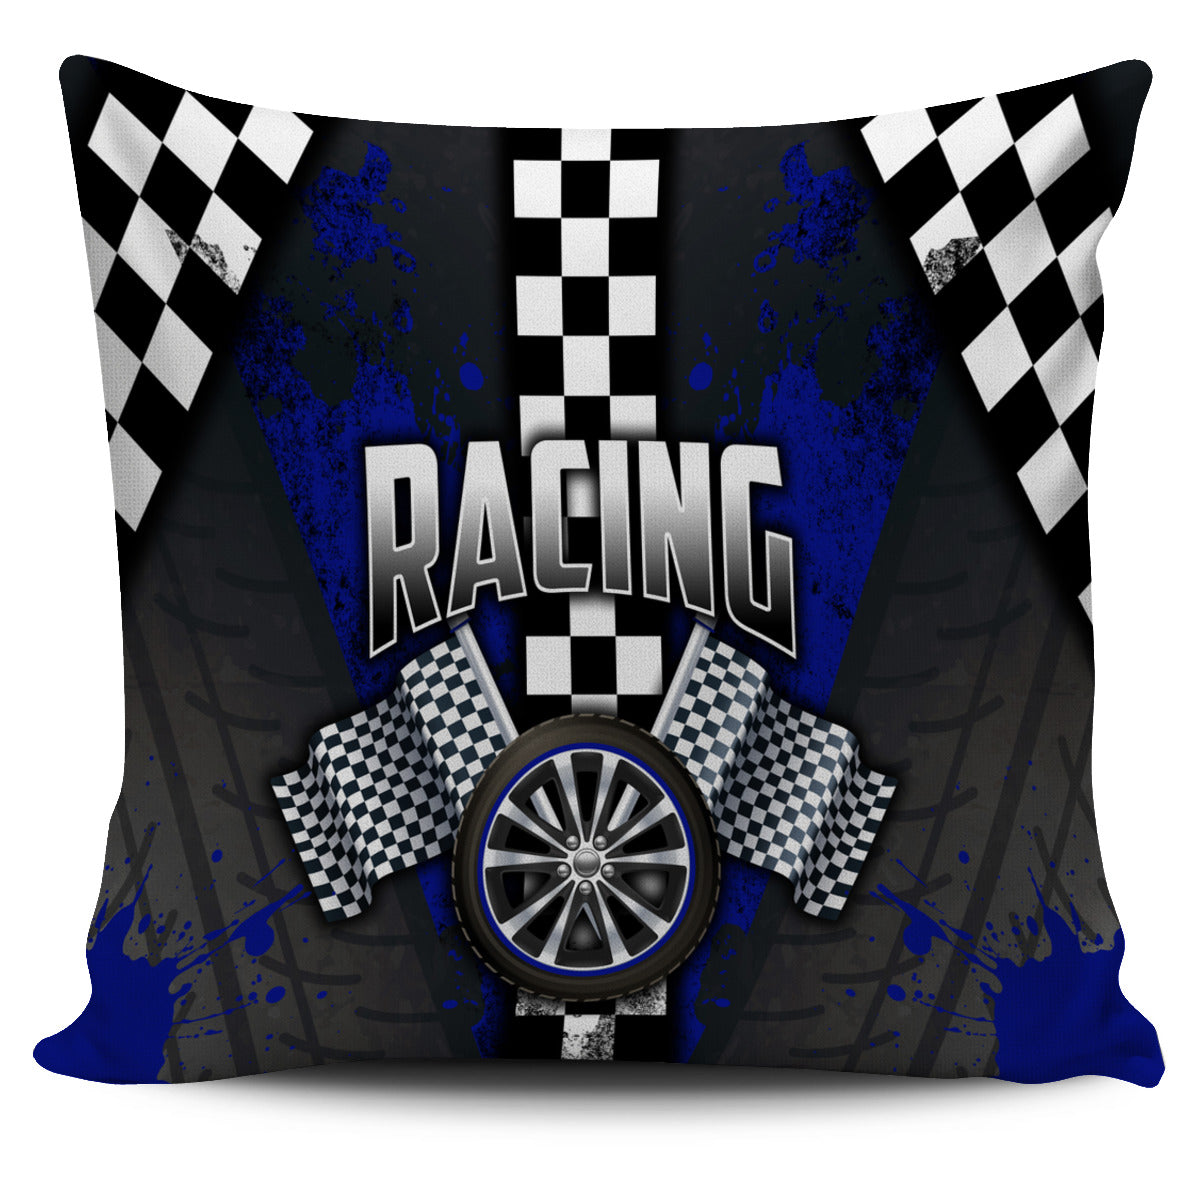 Racing Pillow Cover Blue